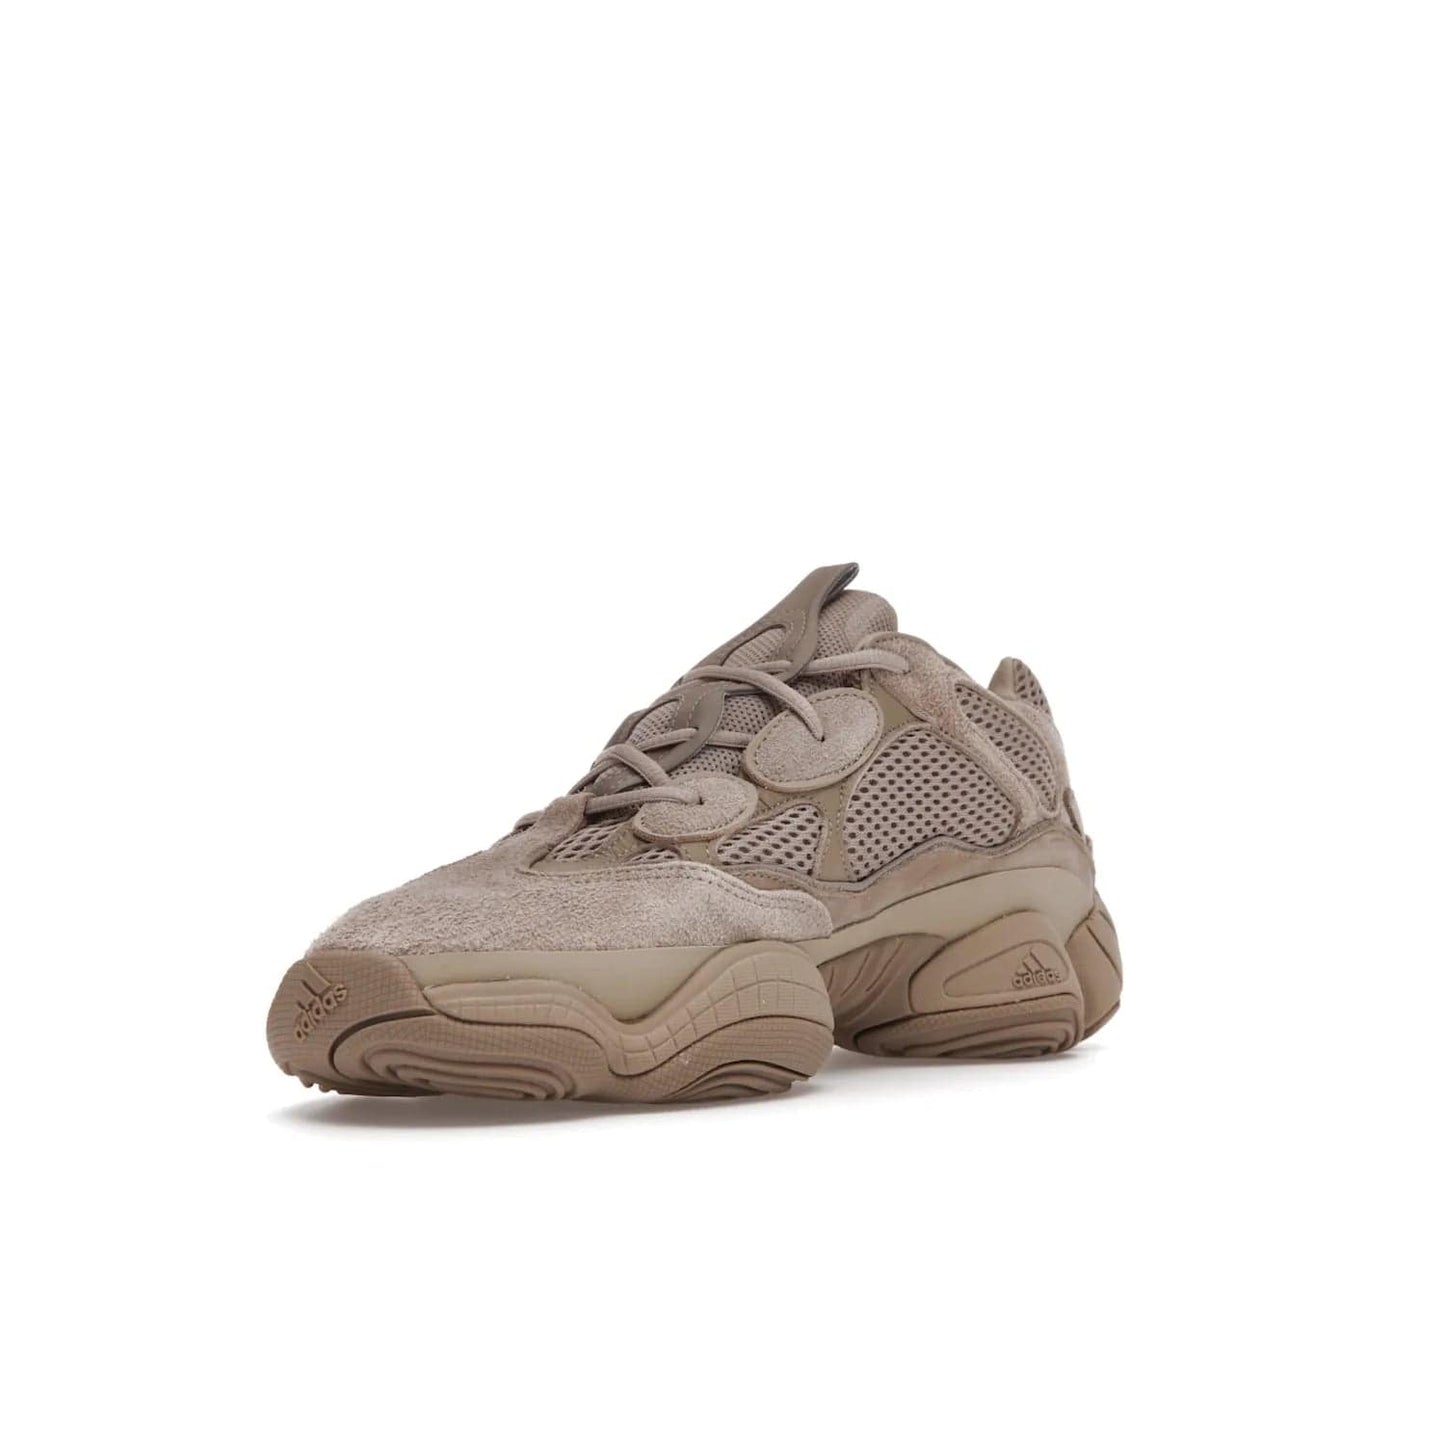 adidas Yeezy 500 Taupe Light - Image 14 - Only at www.BallersClubKickz.com - The adidas Yeezy 500 Taupe Light combines mesh, leather, and suede, with a durable adiPRENE sole for an eye-catching accessory. Reflective piping adds the perfect finishing touches to this unique silhouette. Ideal for any wardrobe, releasing in June 2021.